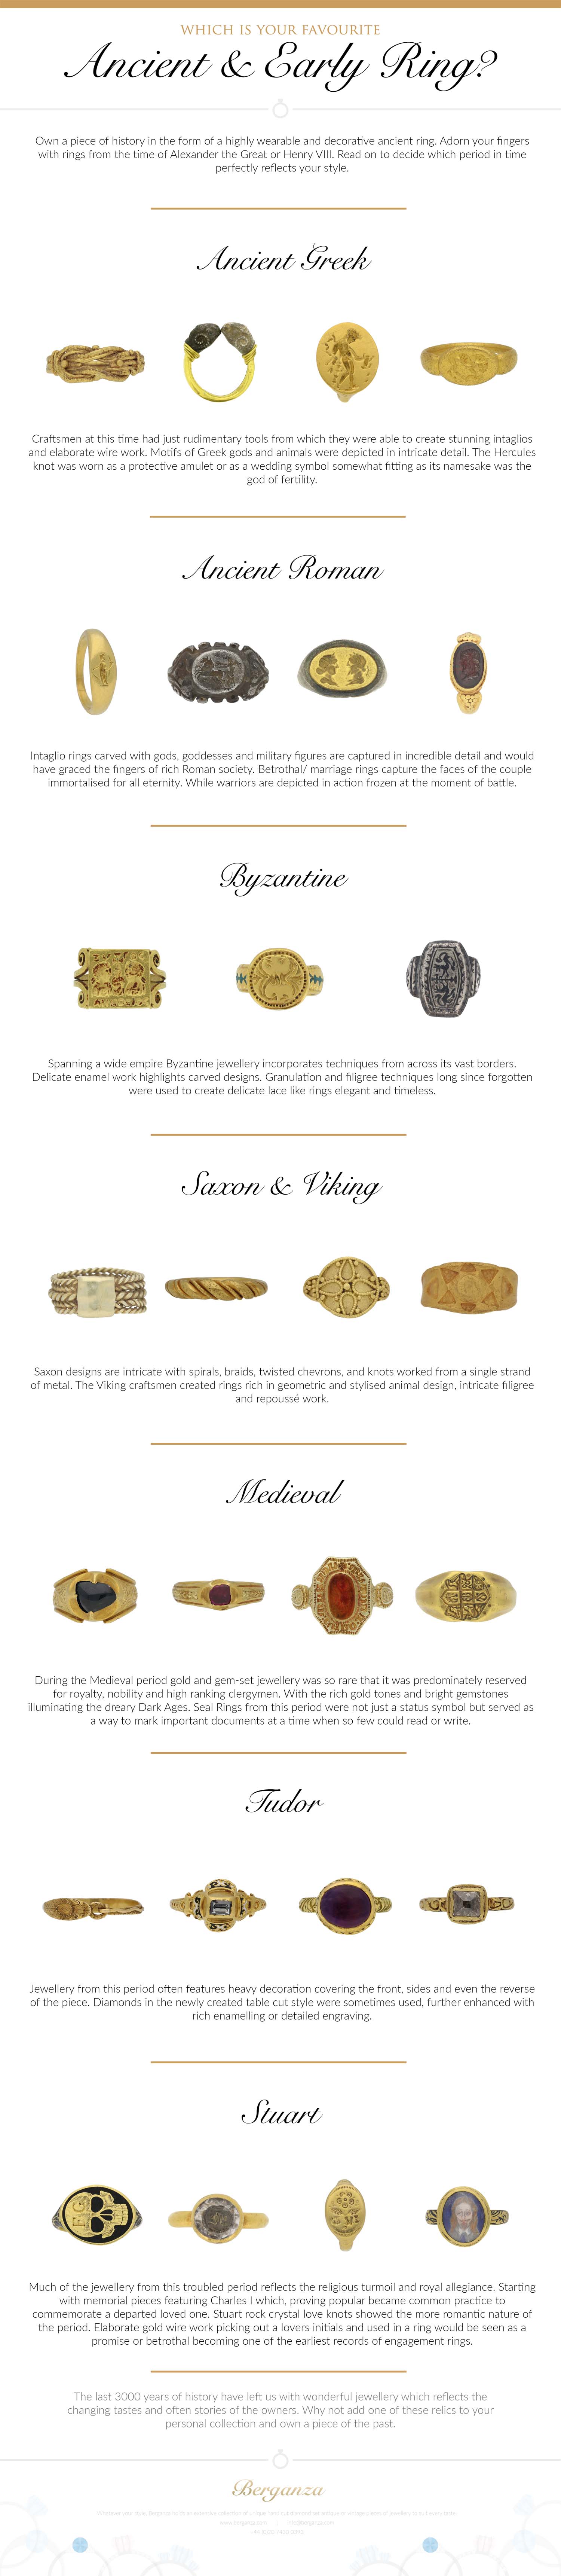 Which Is Your Favorite Ancient and Early Ring?